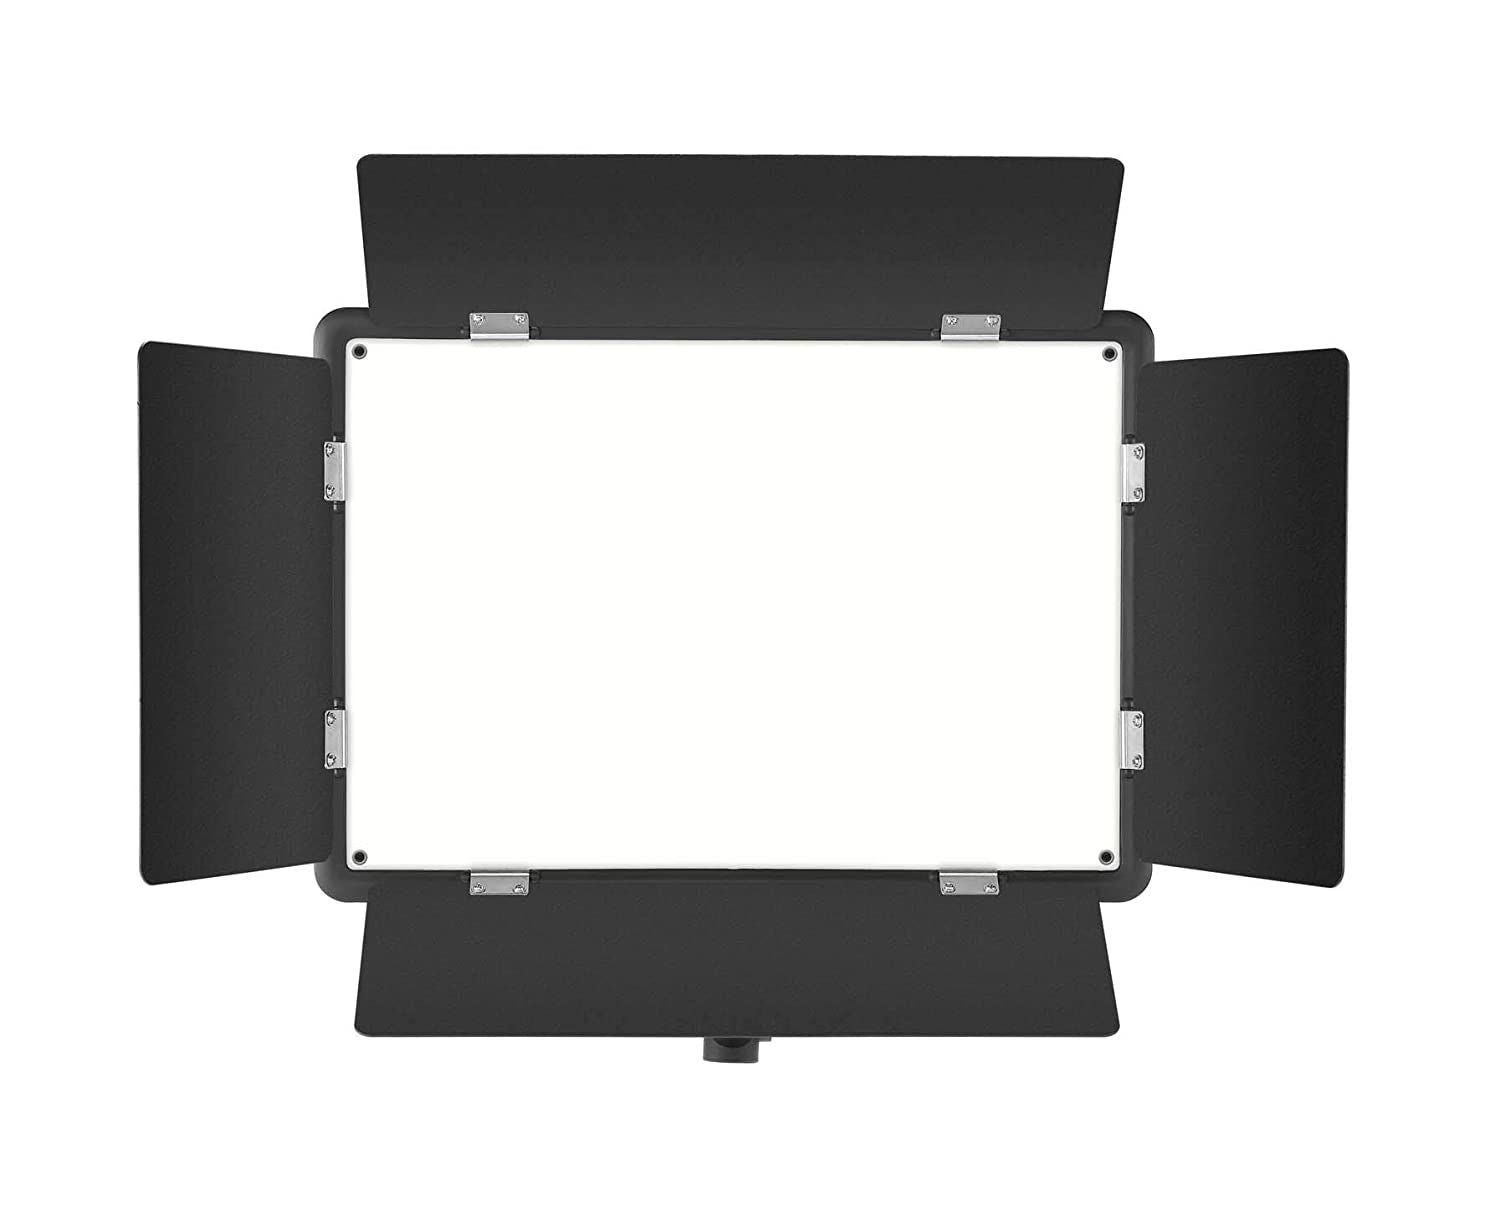 Simpex Studio Light Led 1500 With Battery Provision